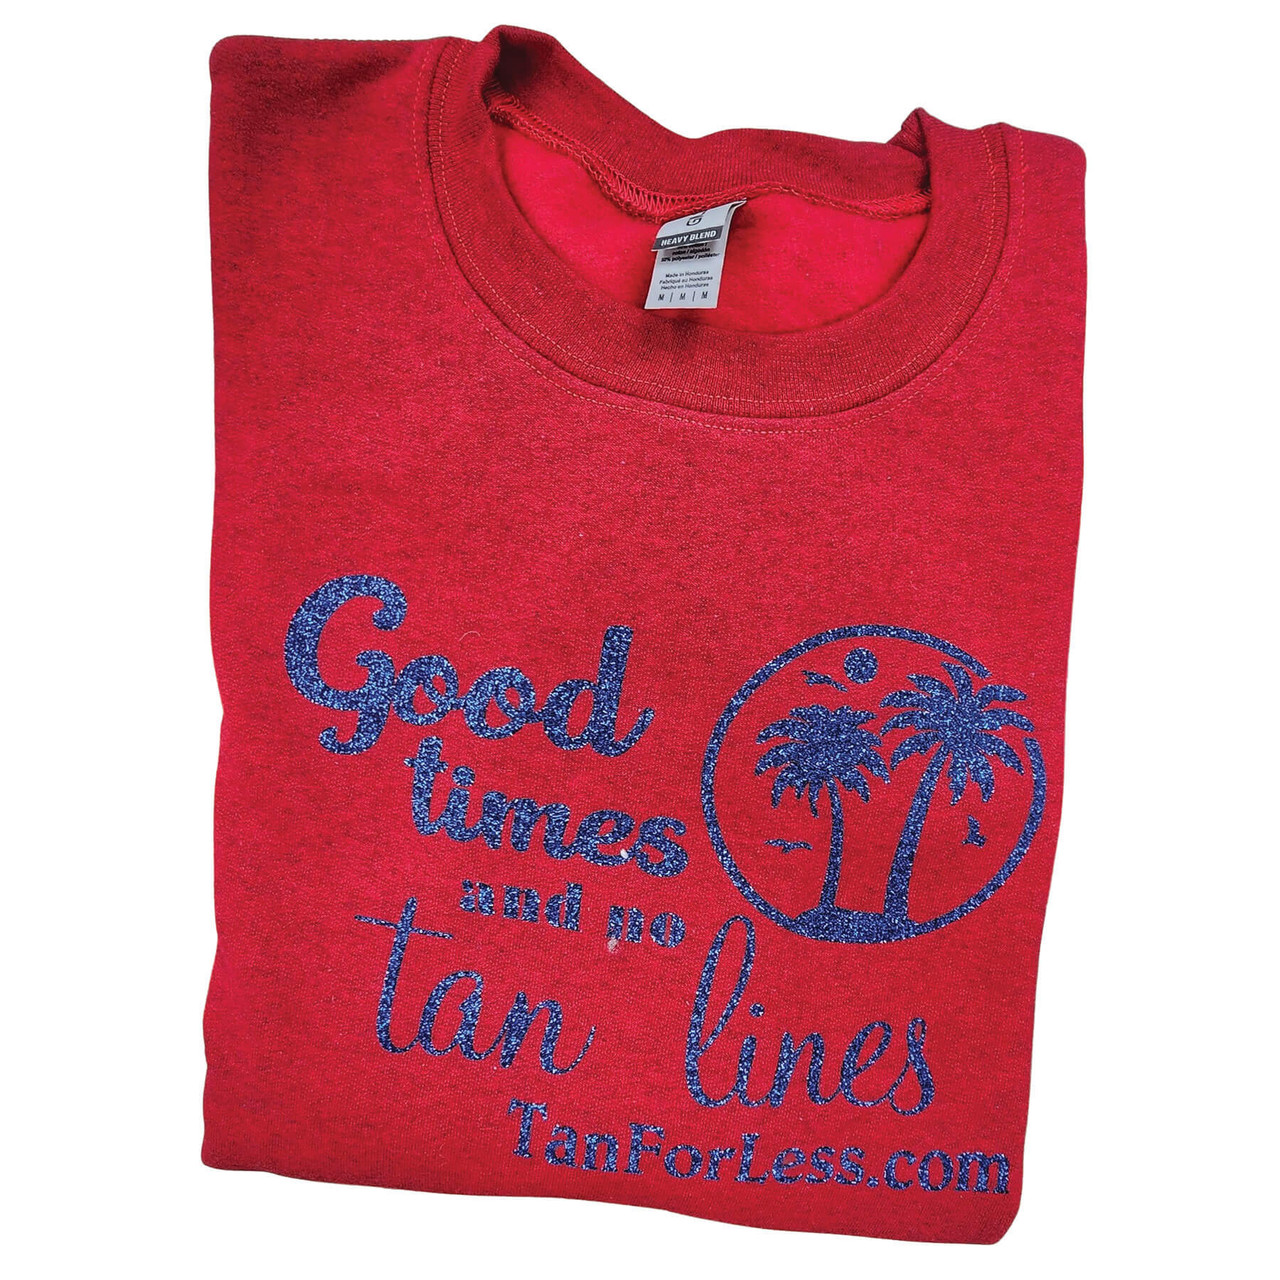 Cherry Red Sweatshirt with Blue Glitter Lettering